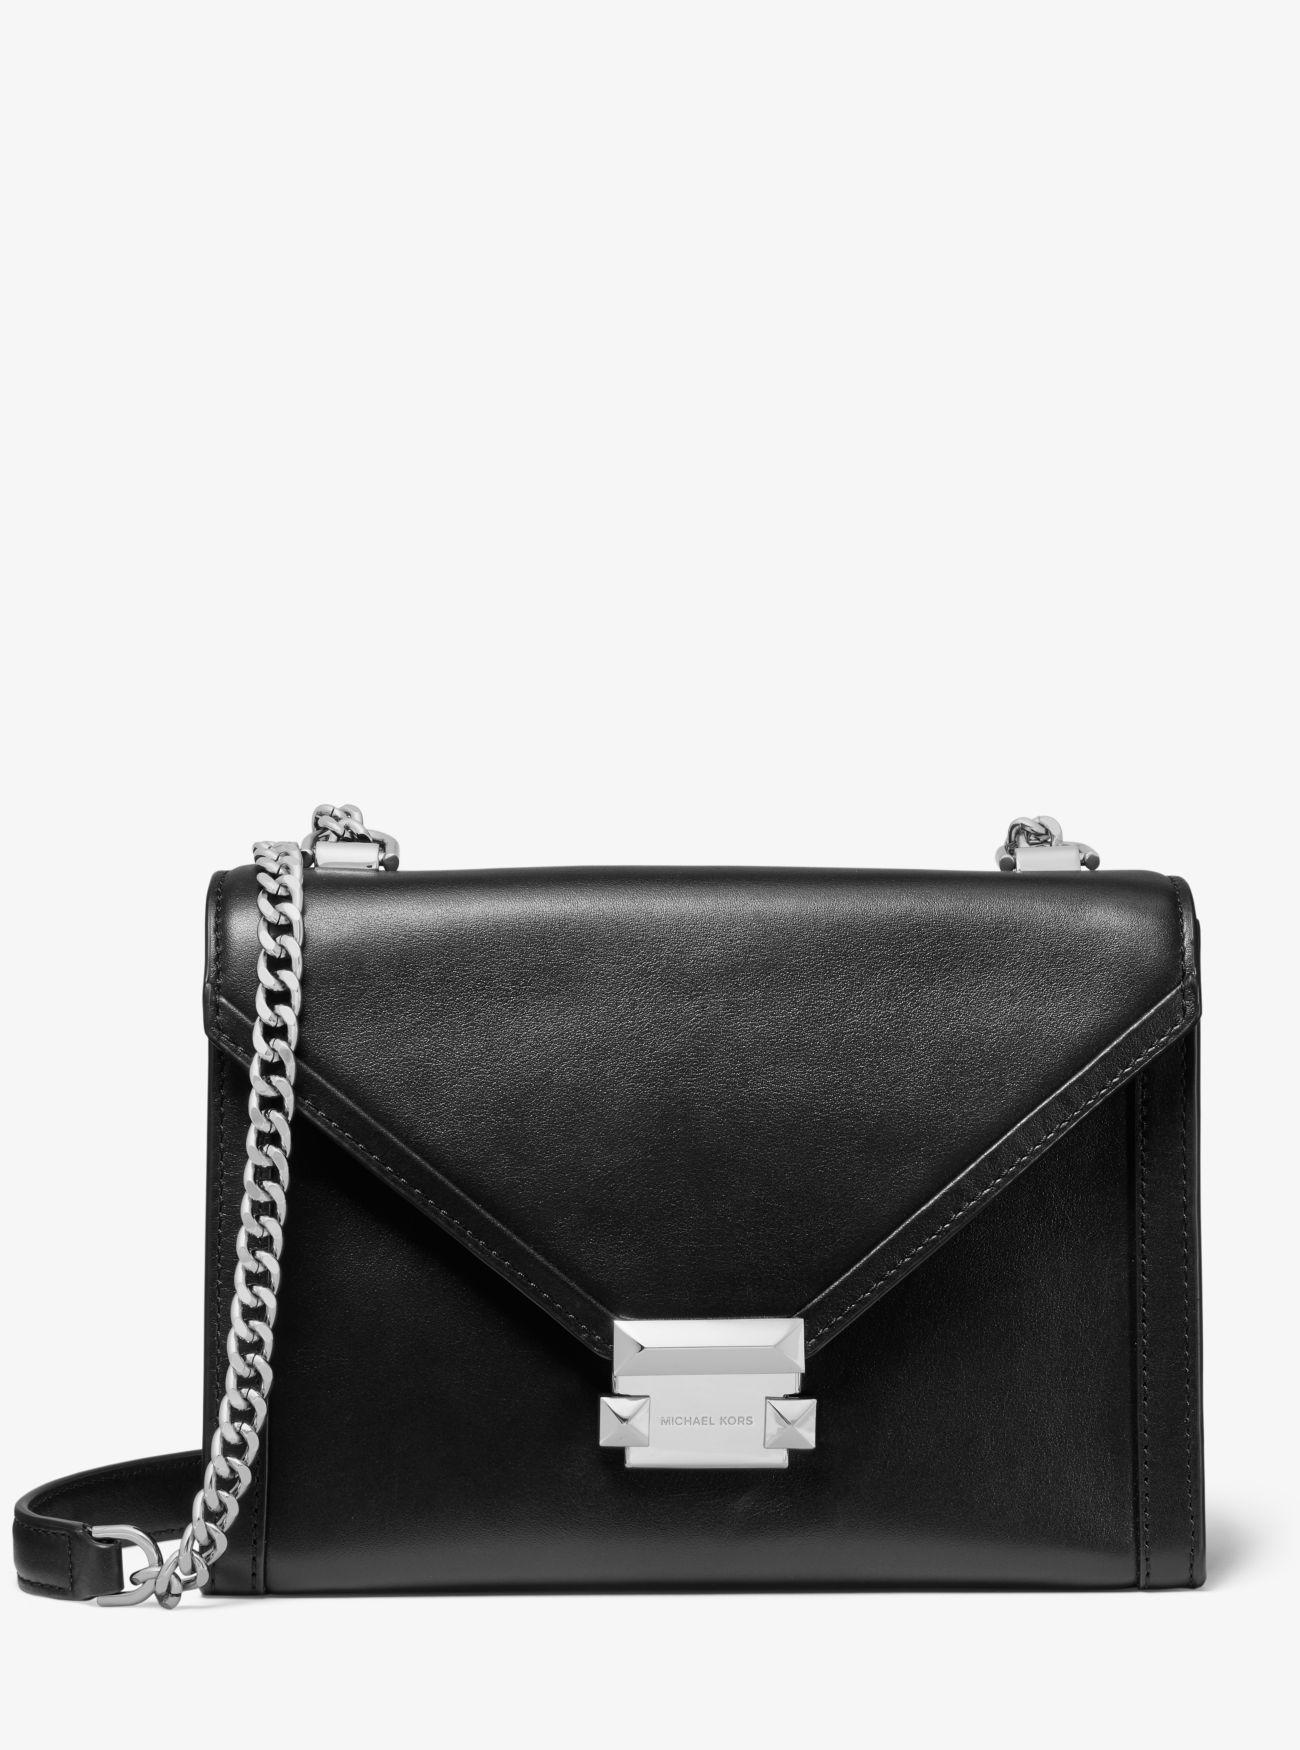 Michael Kors Whitney Large Leather Convertible Shoulder Bag in Black - Lyst